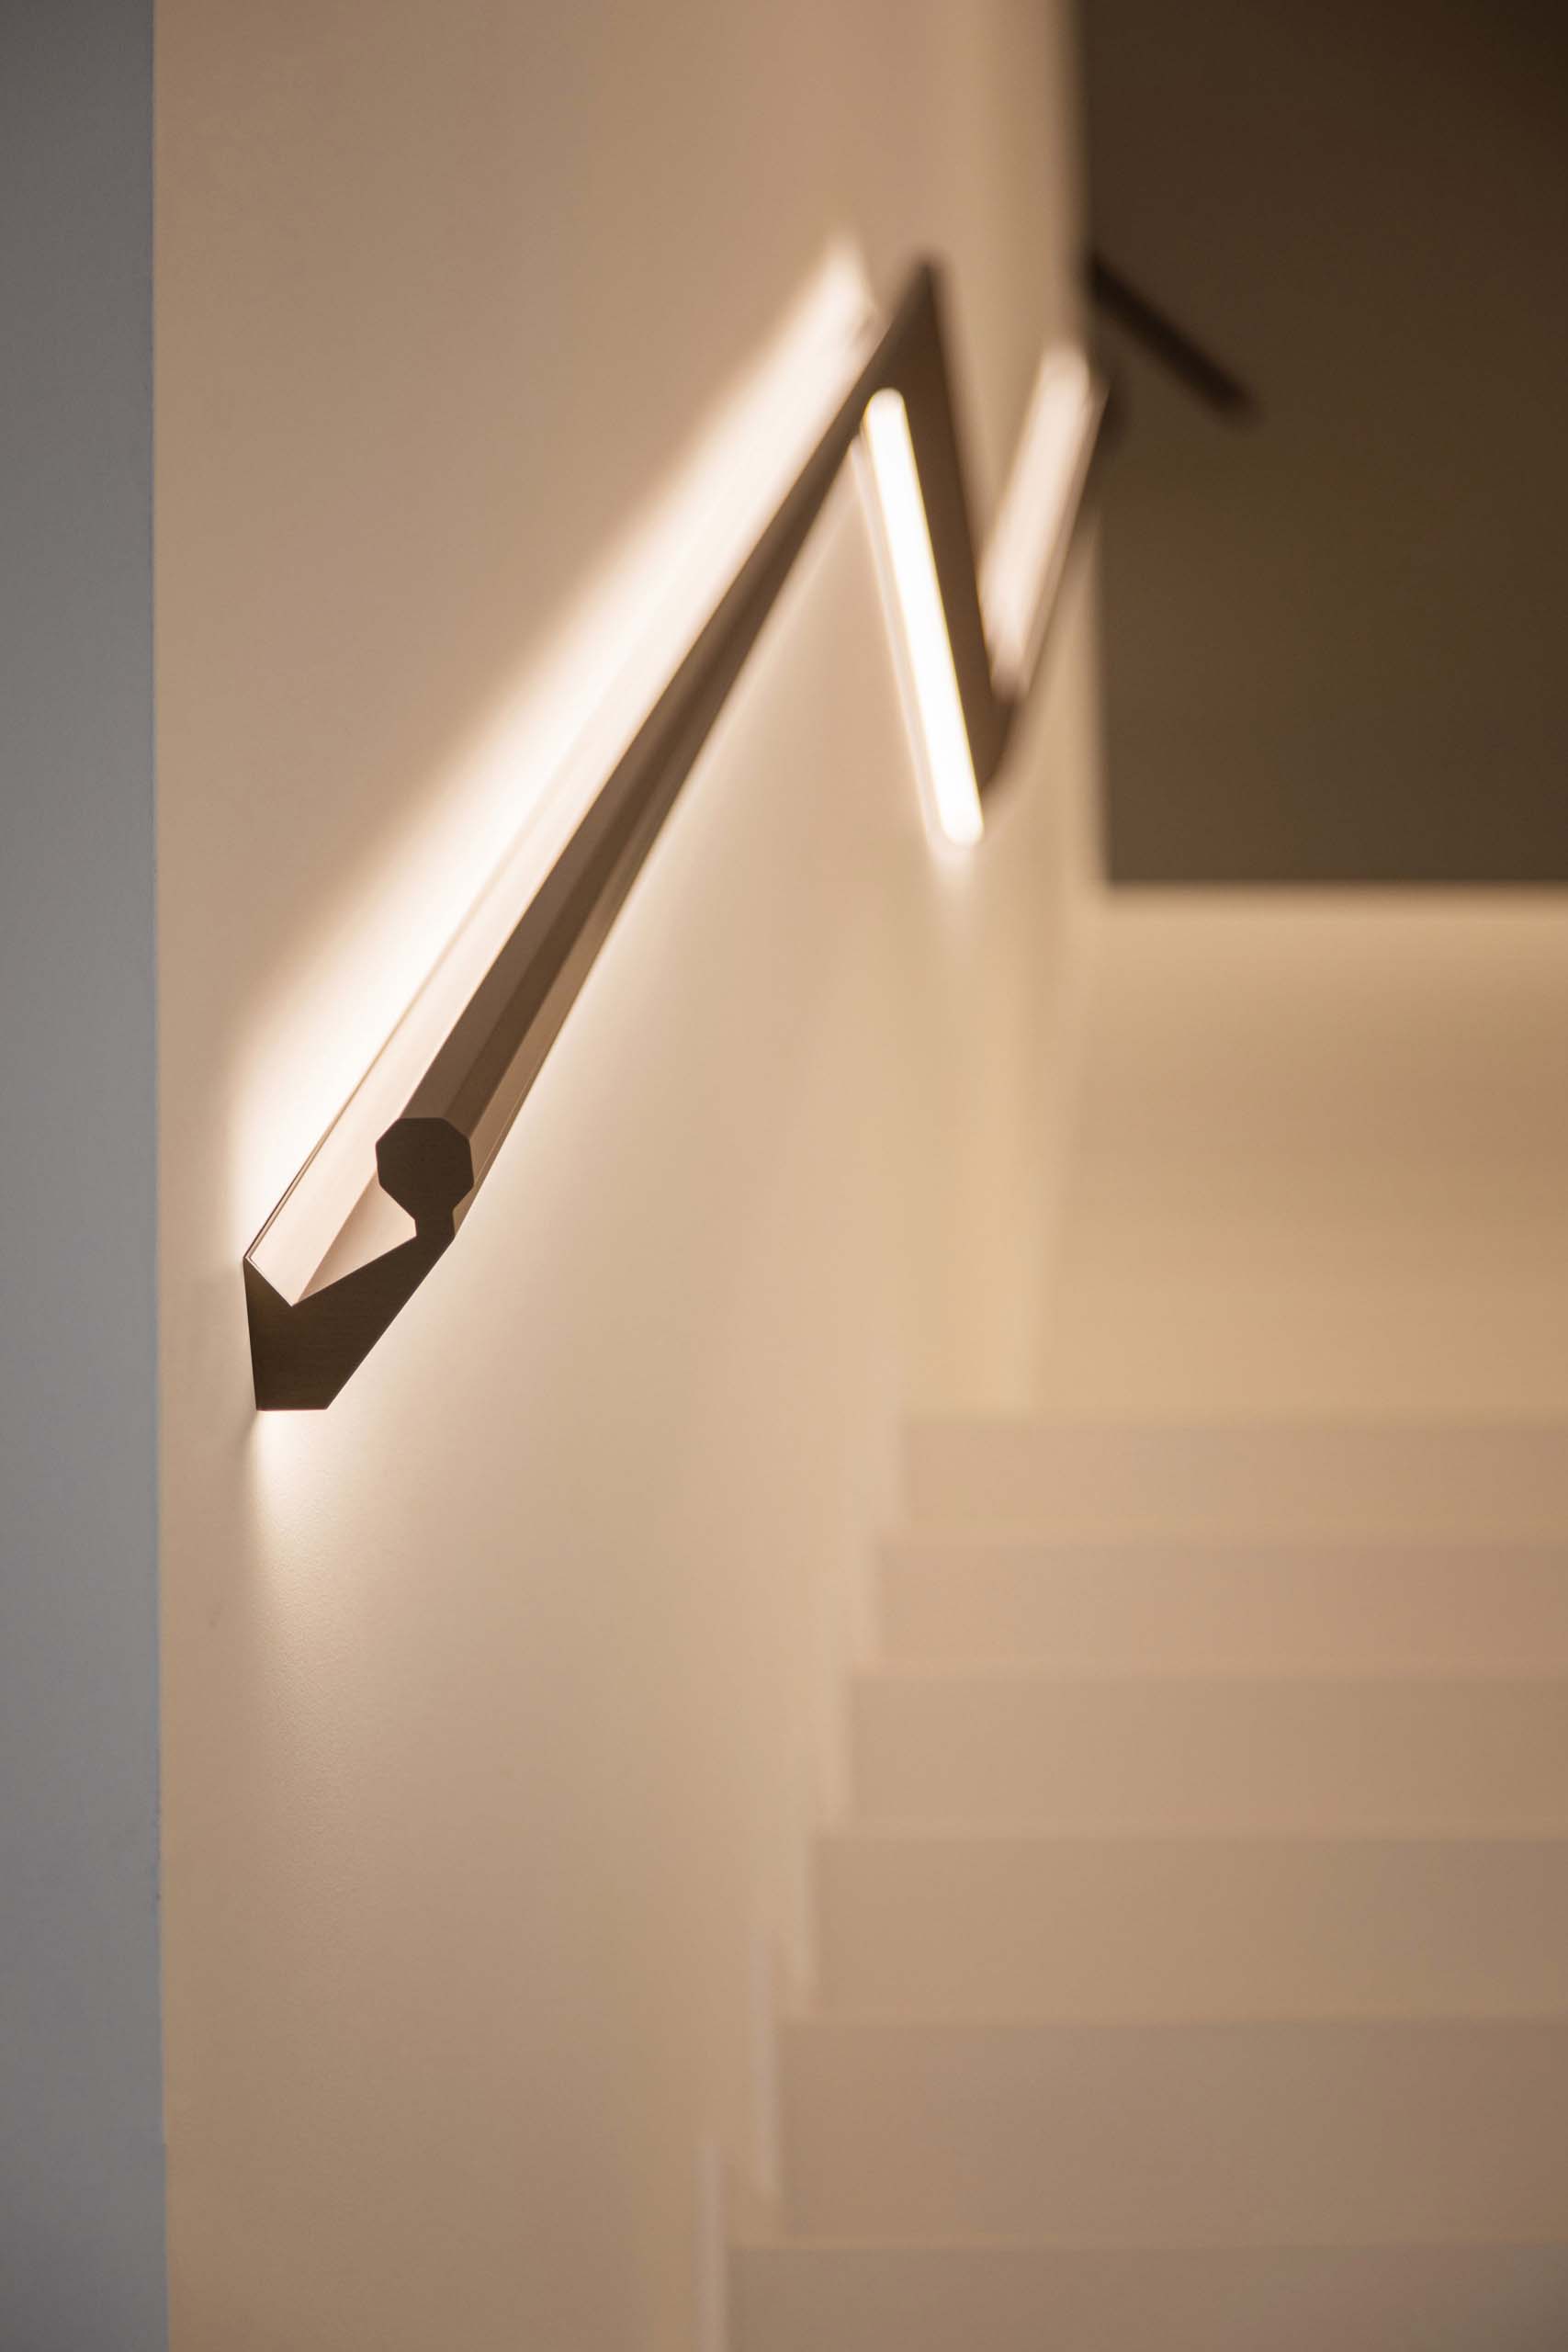 A modern staircase handrail designed with hidden LED lighting.